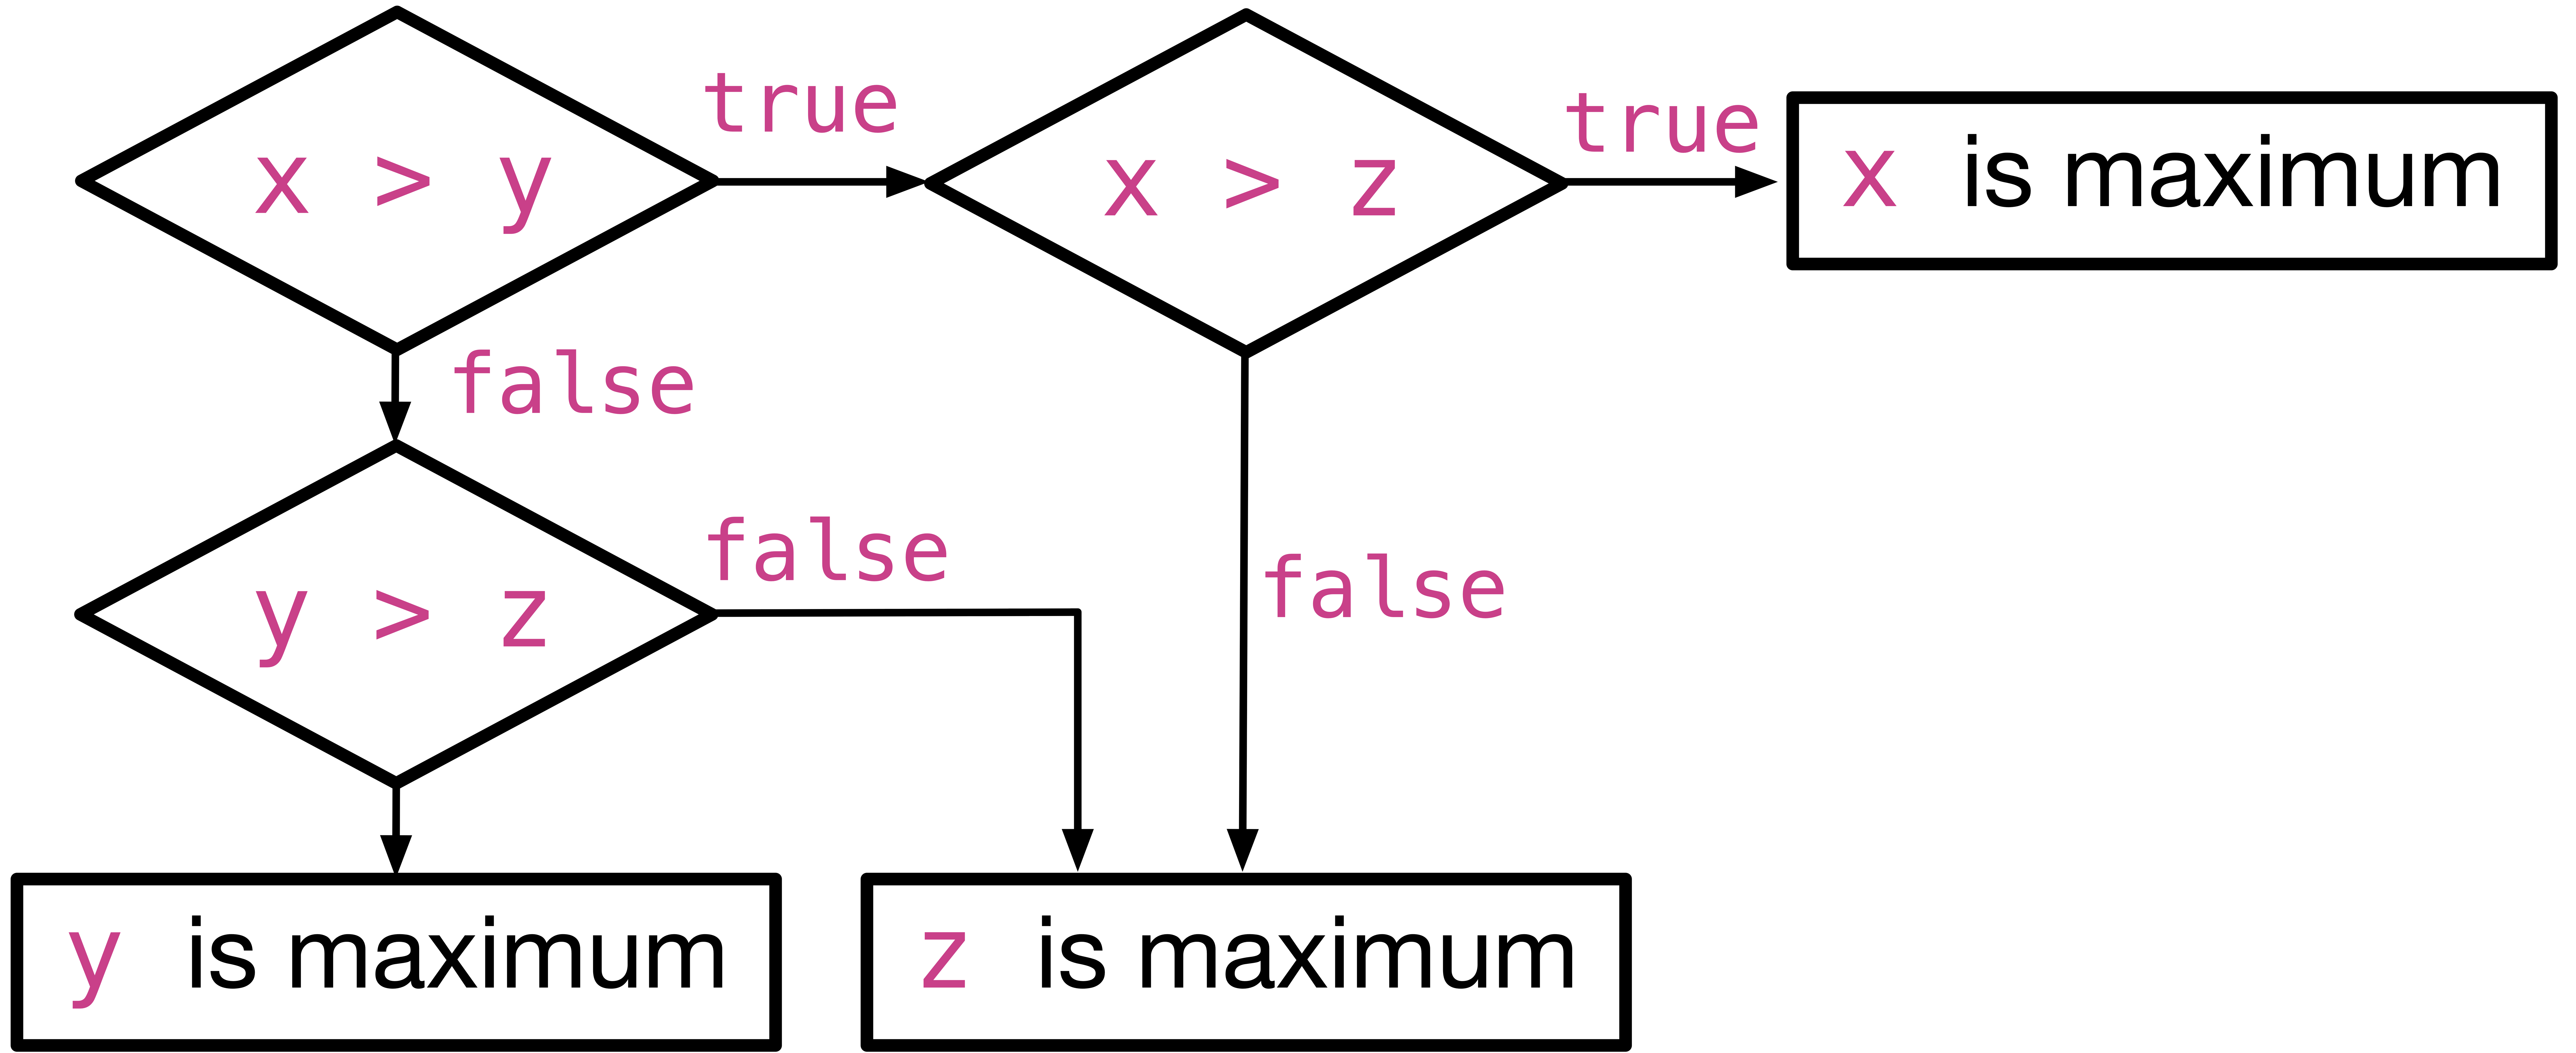 Flow chart of the steps of comparing three numbers to find the maximum.